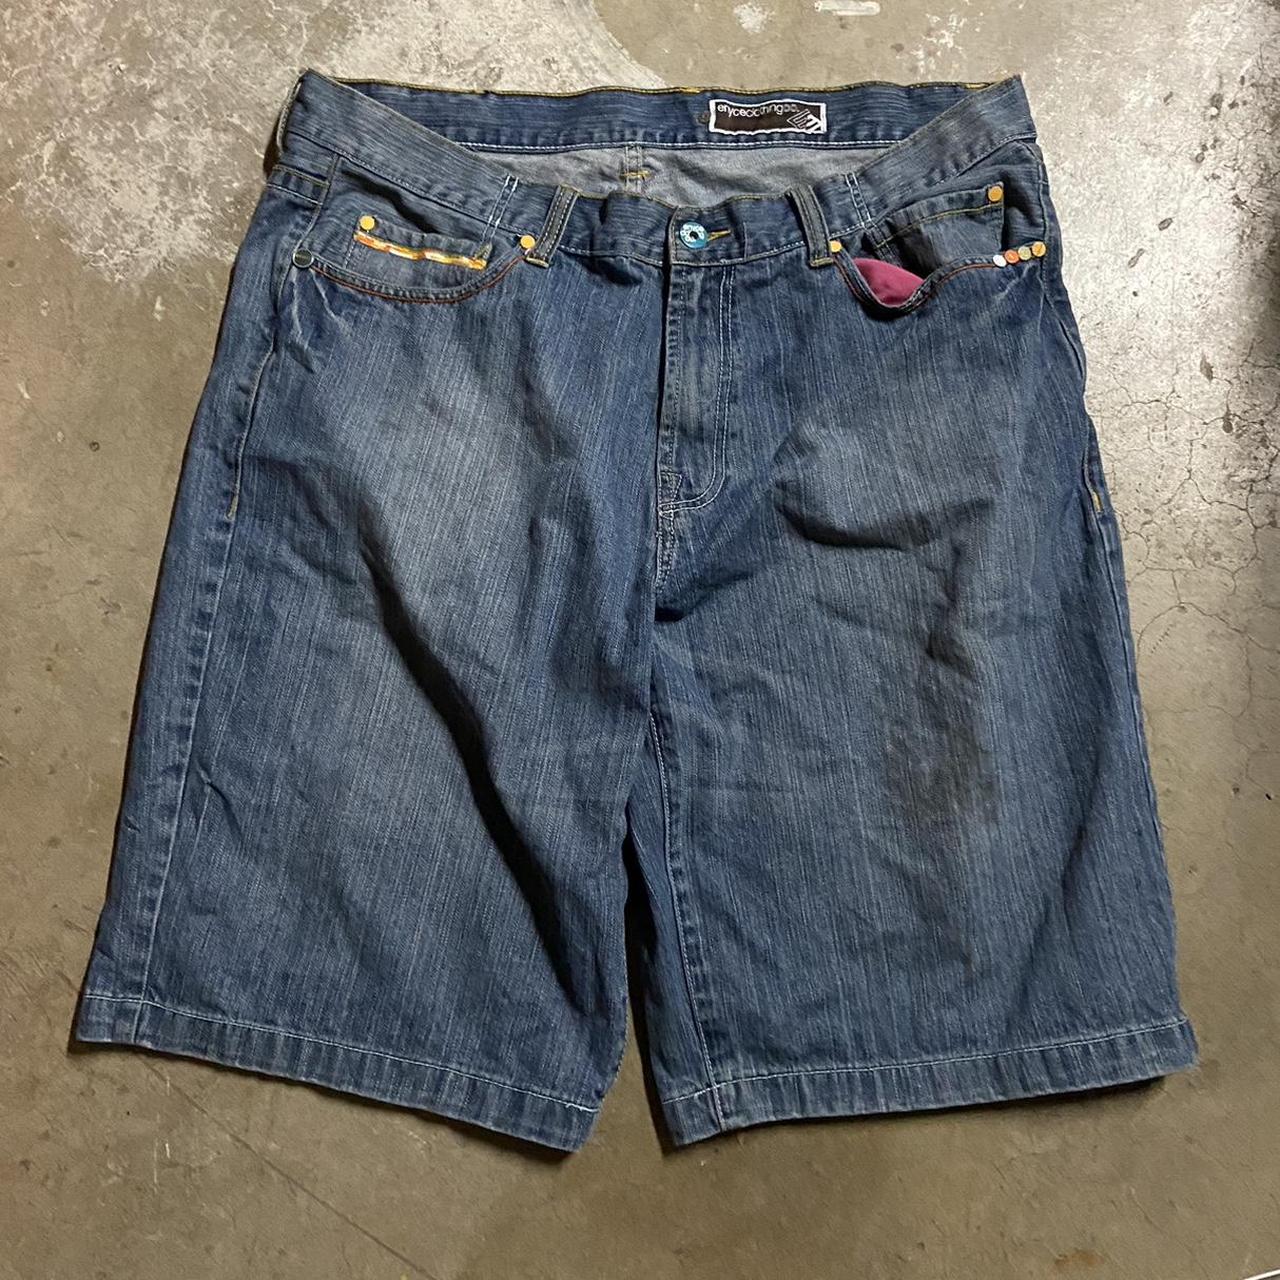 Super baggy jorts by Enyce - cool pockets Size 40... - Depop